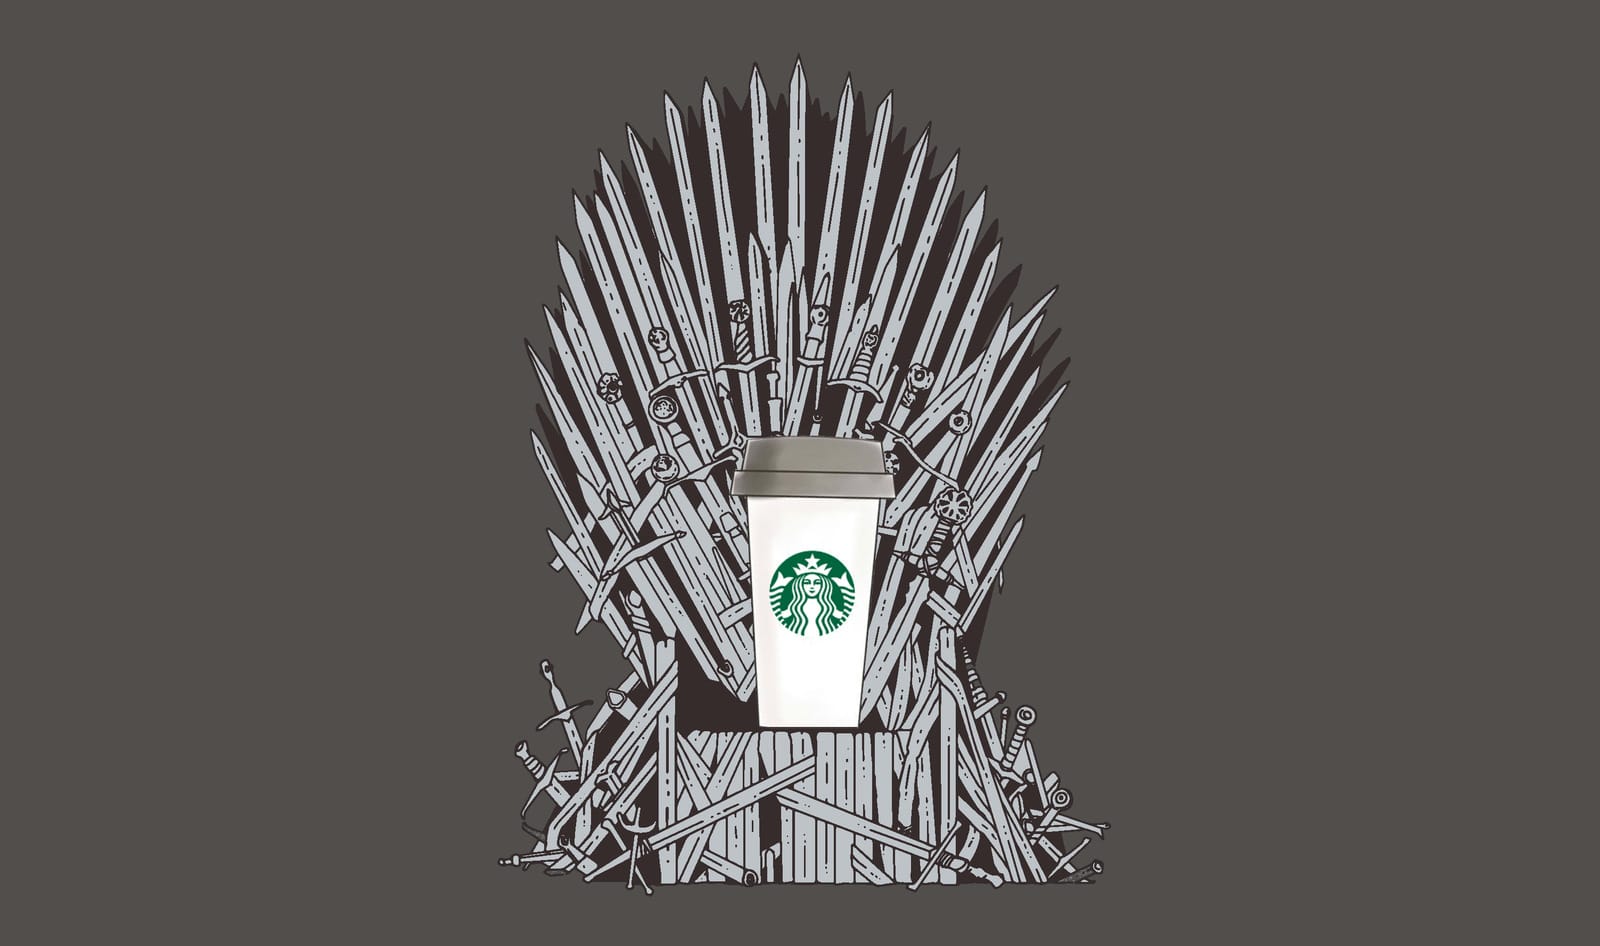 Which Vegan Starbucks Drink Would These Game of Thrones Characters Be?